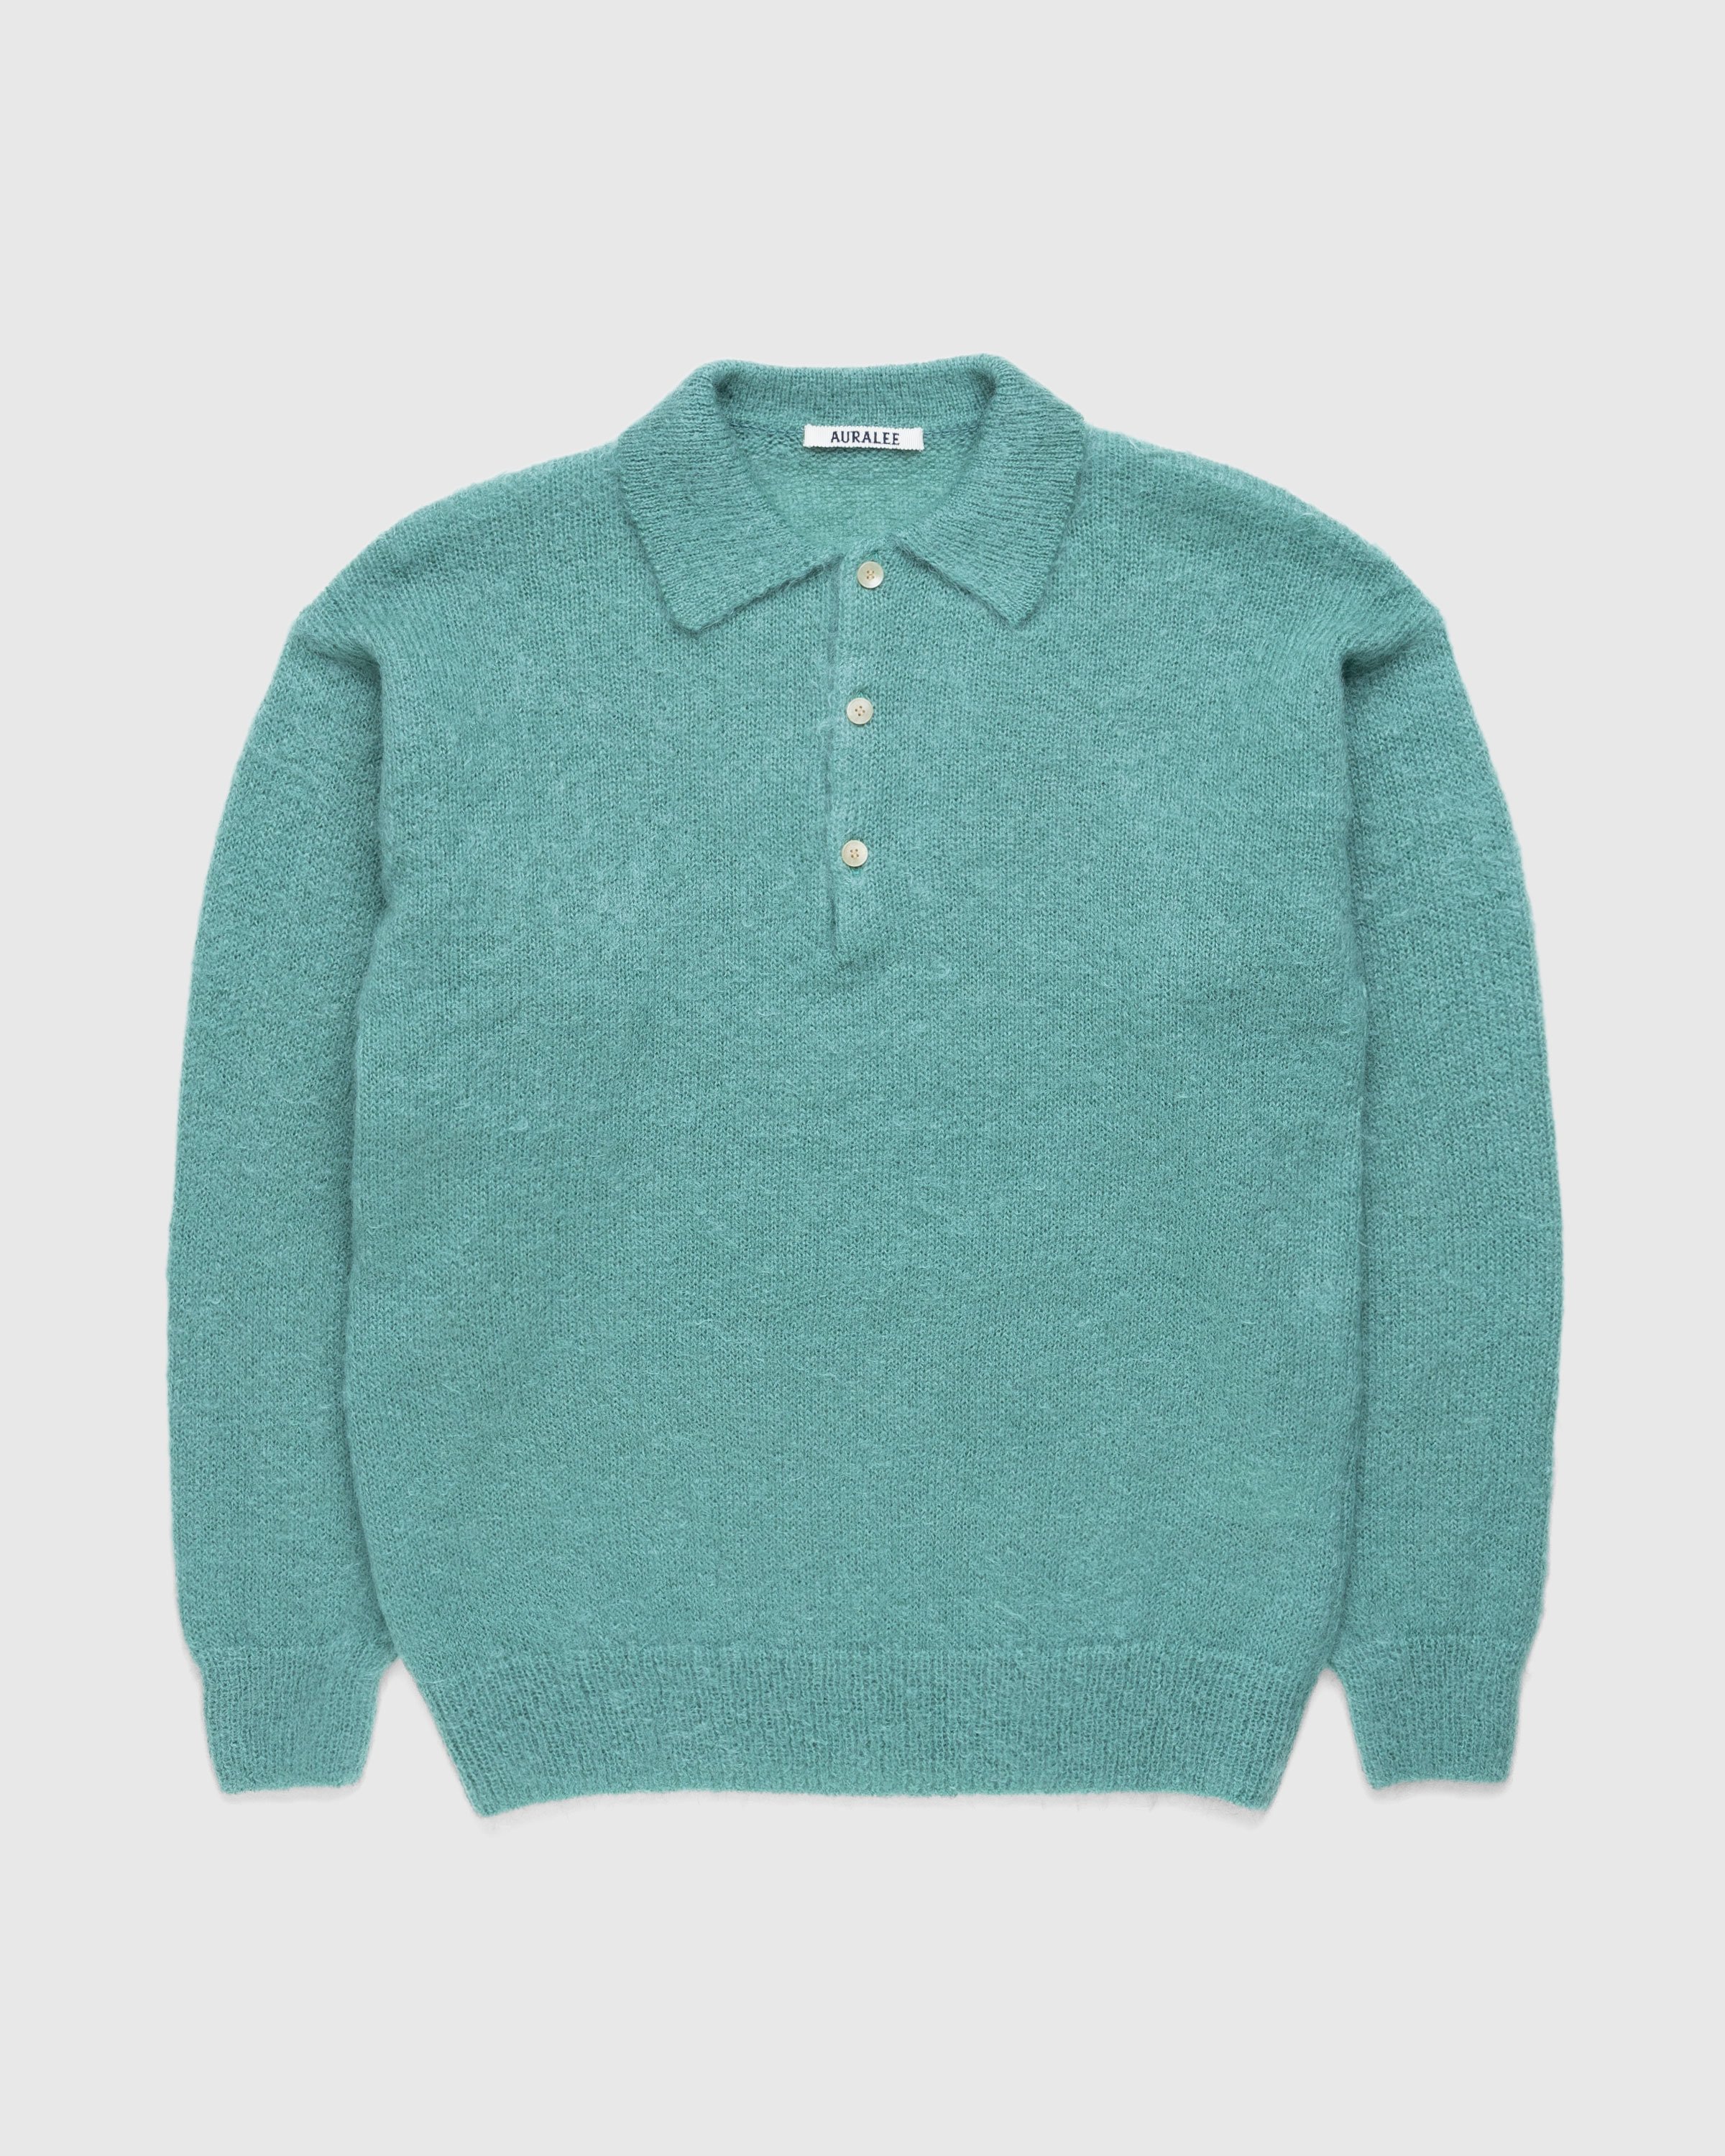 Auralee - Brushed Mohair Knit Polo Jade Green - Clothing - Green - Image 1